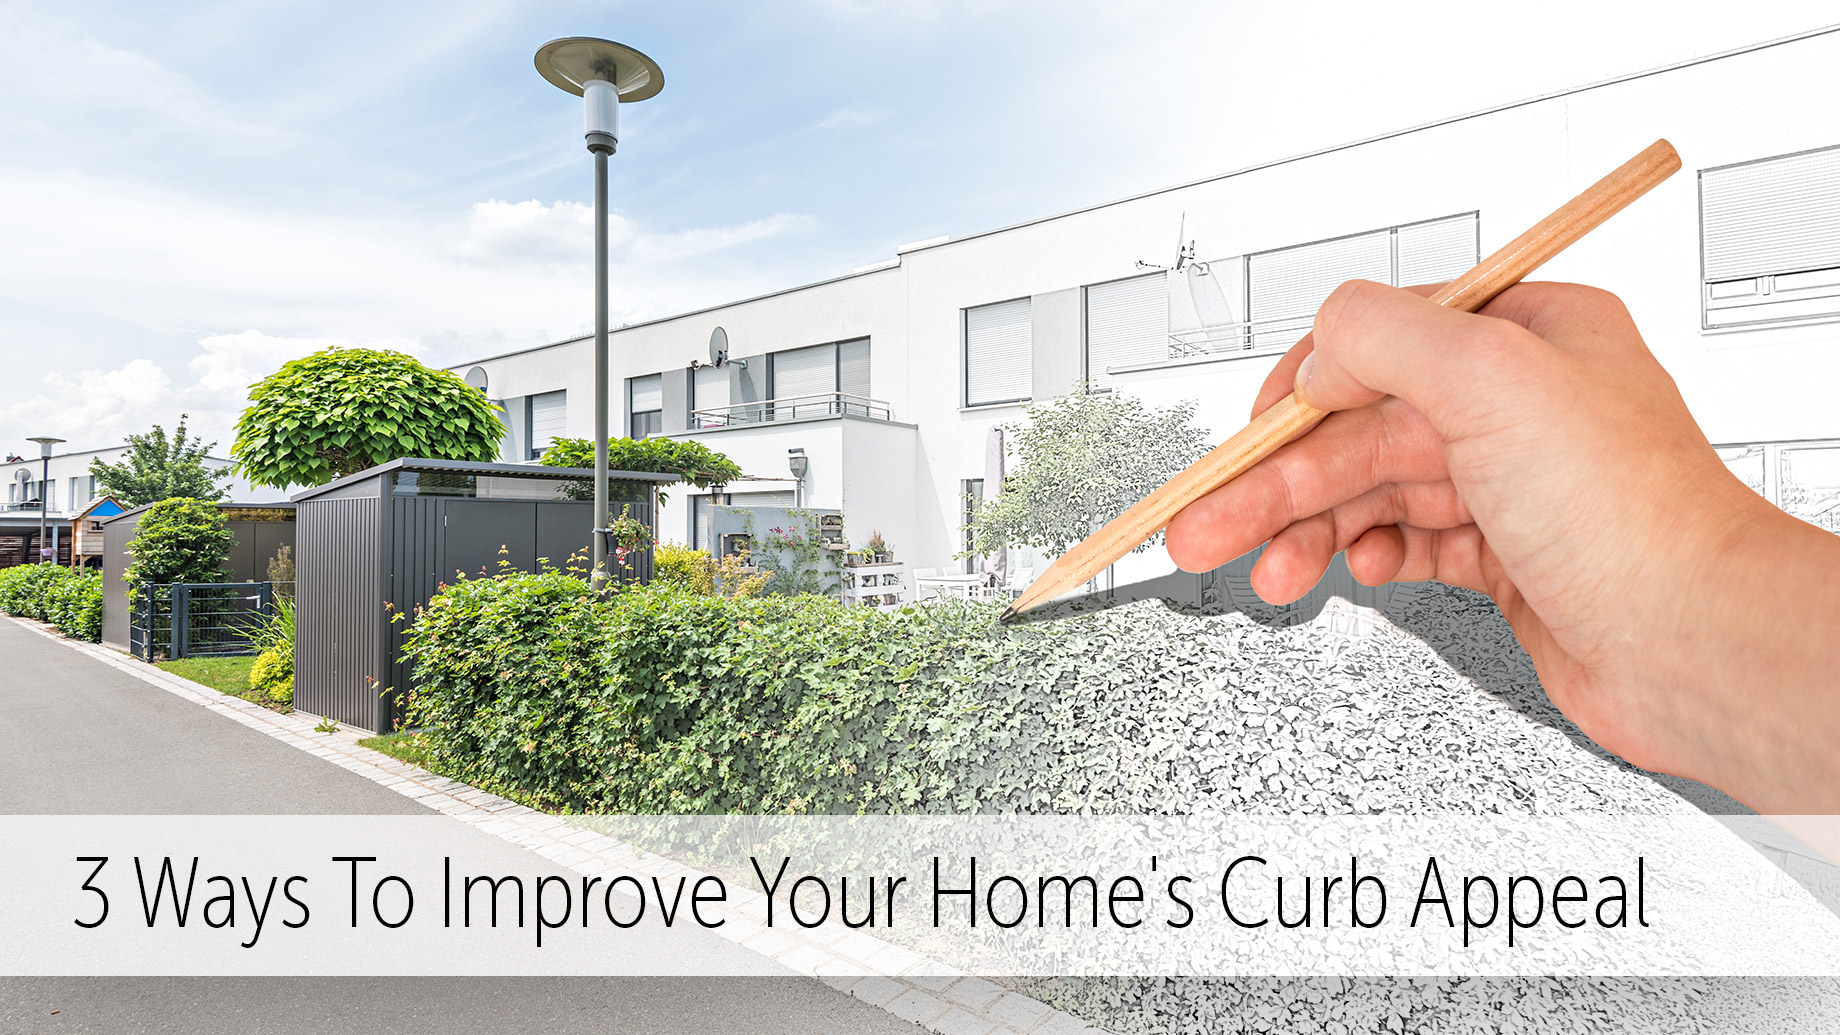 3 Ways To Improve Your Home’s Curb Appeal